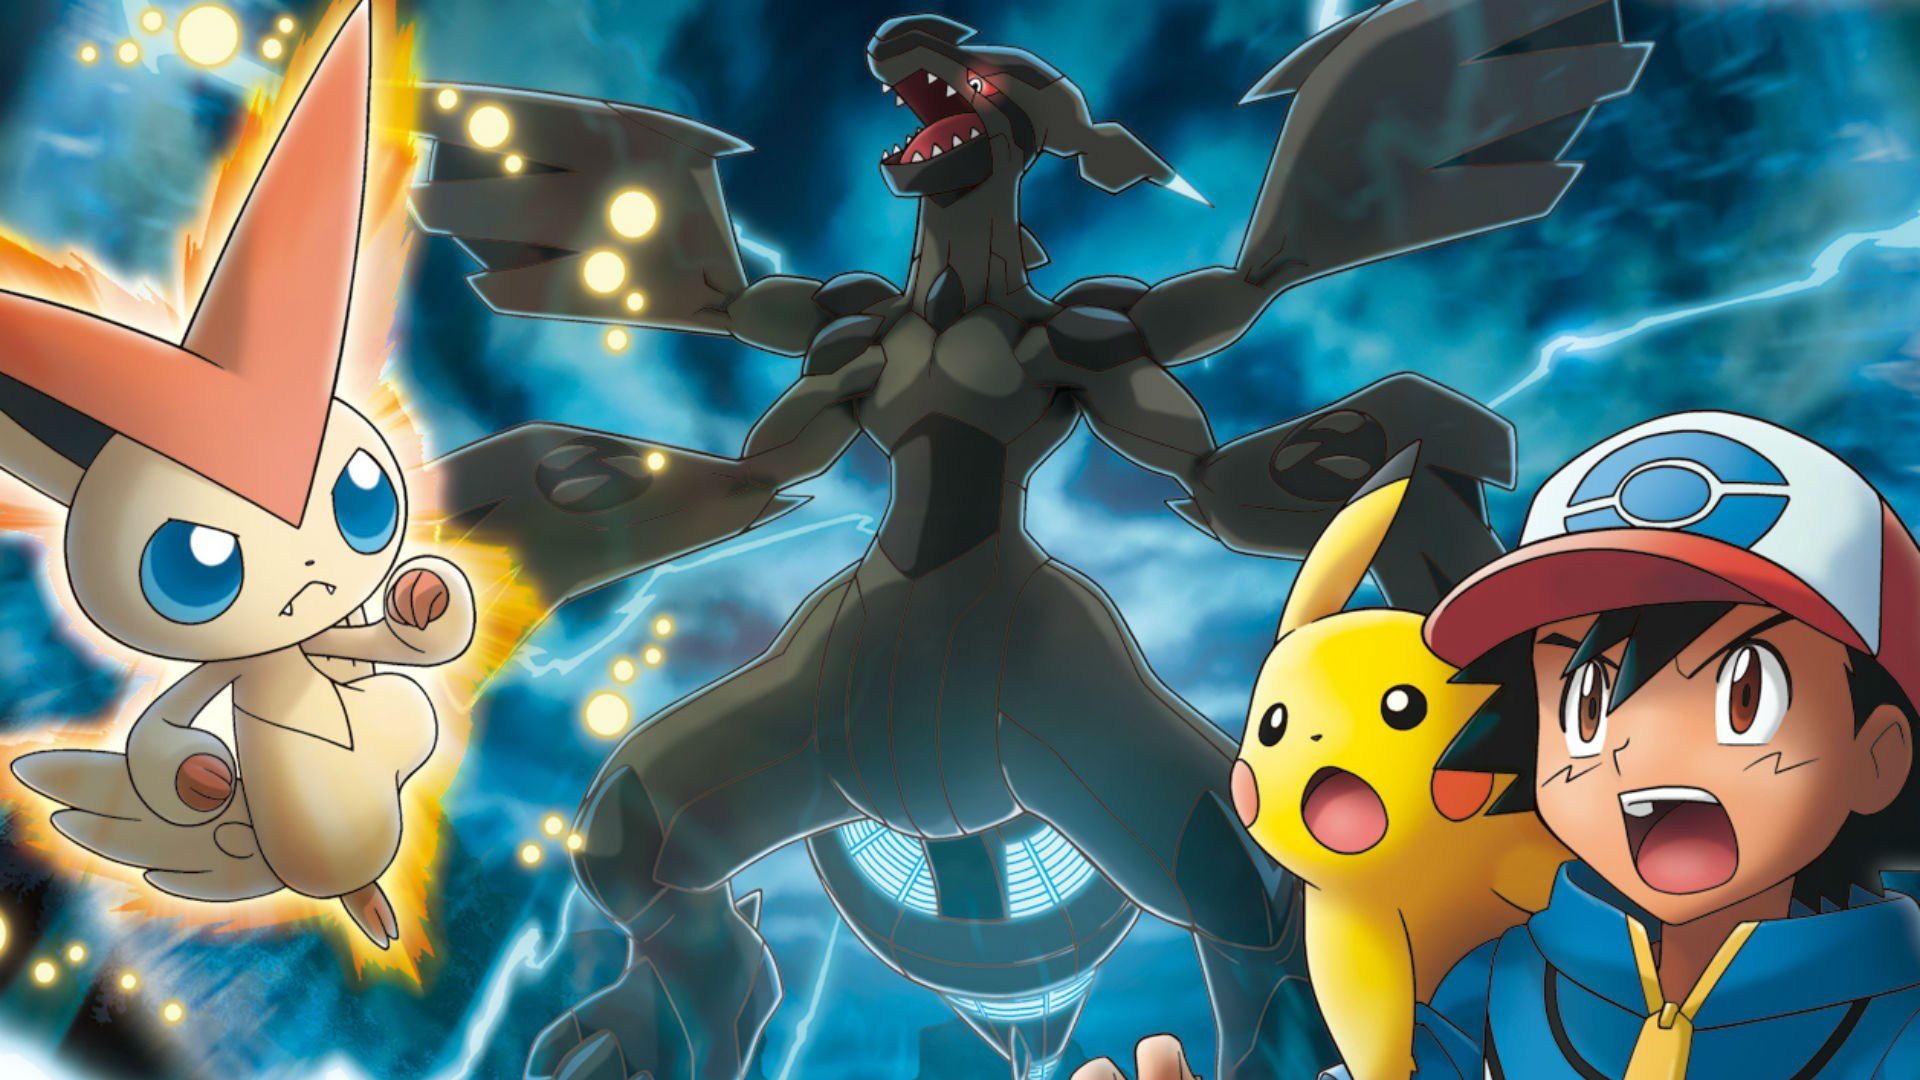 Movie Studios Are Battling Over Live Action Pokémon Rights